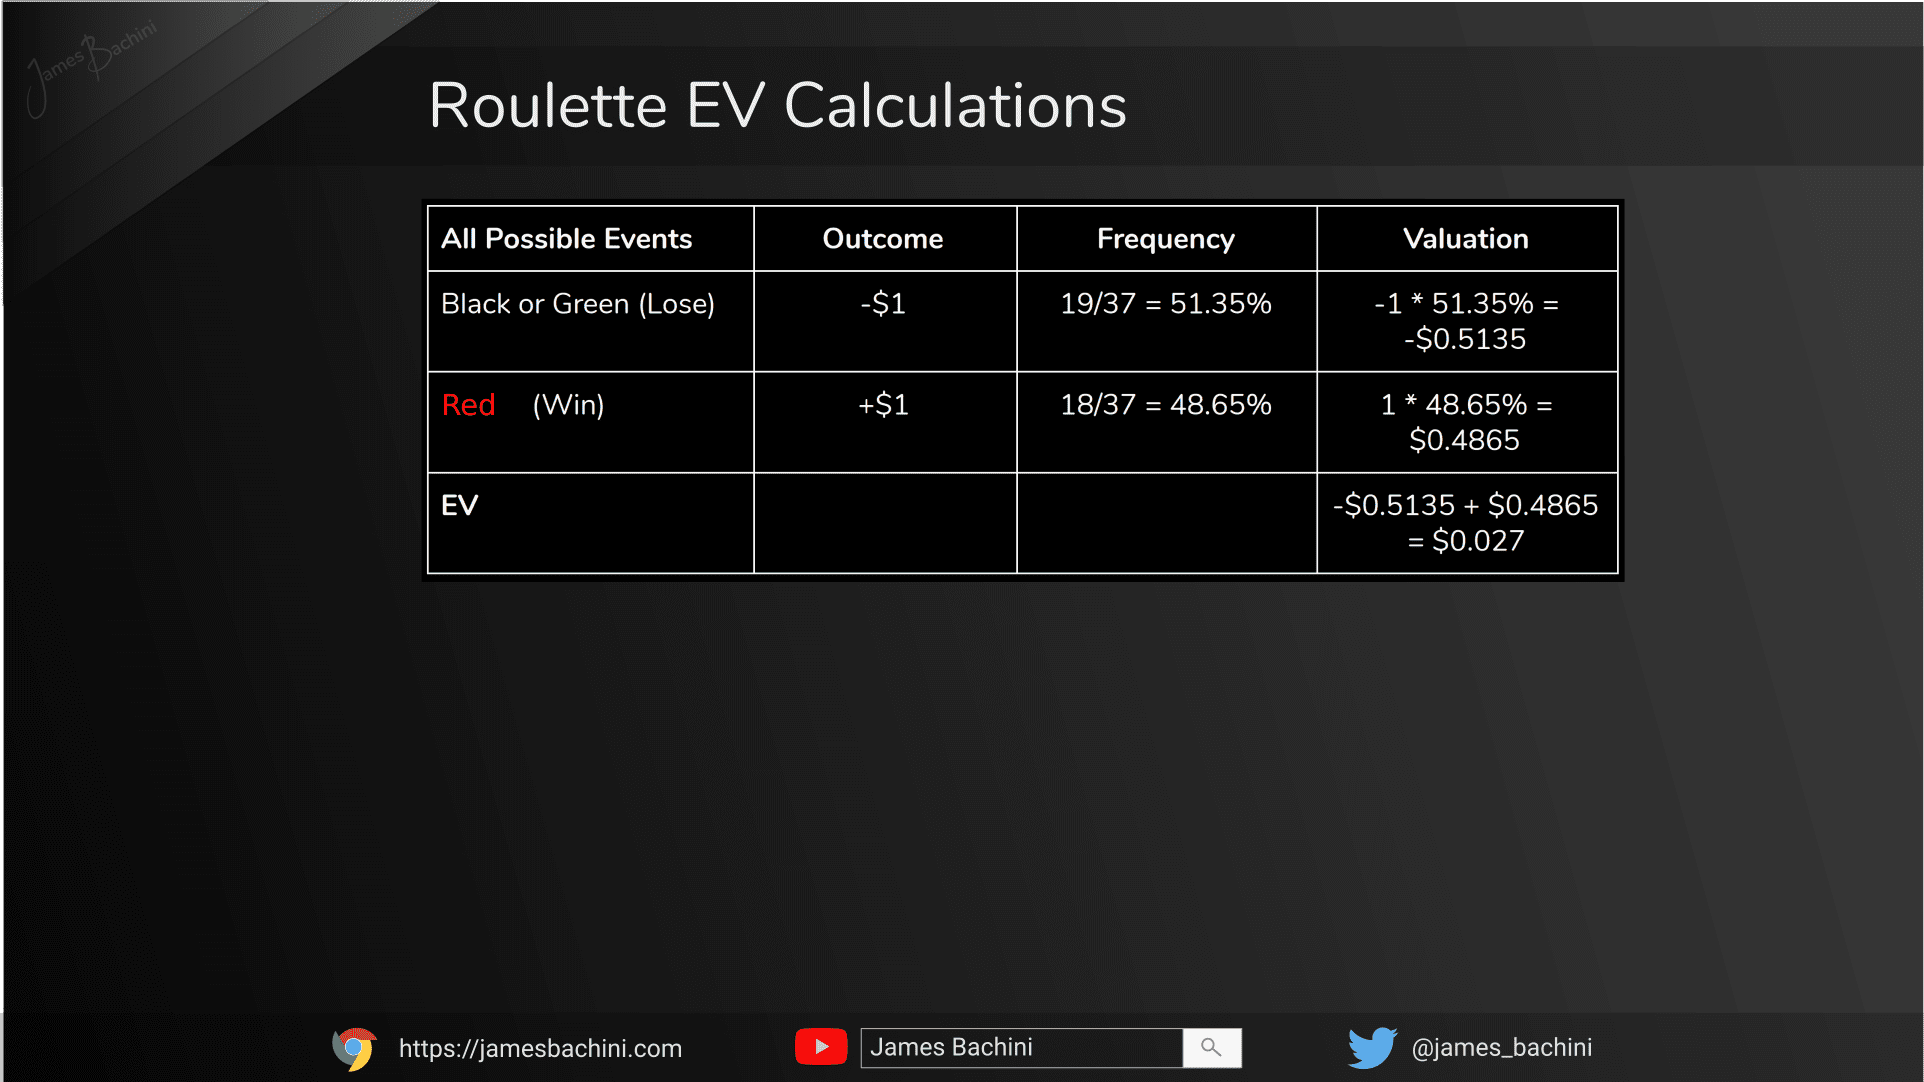 How To Calculate EV (Expected Value) By Analysing Risk & Reward